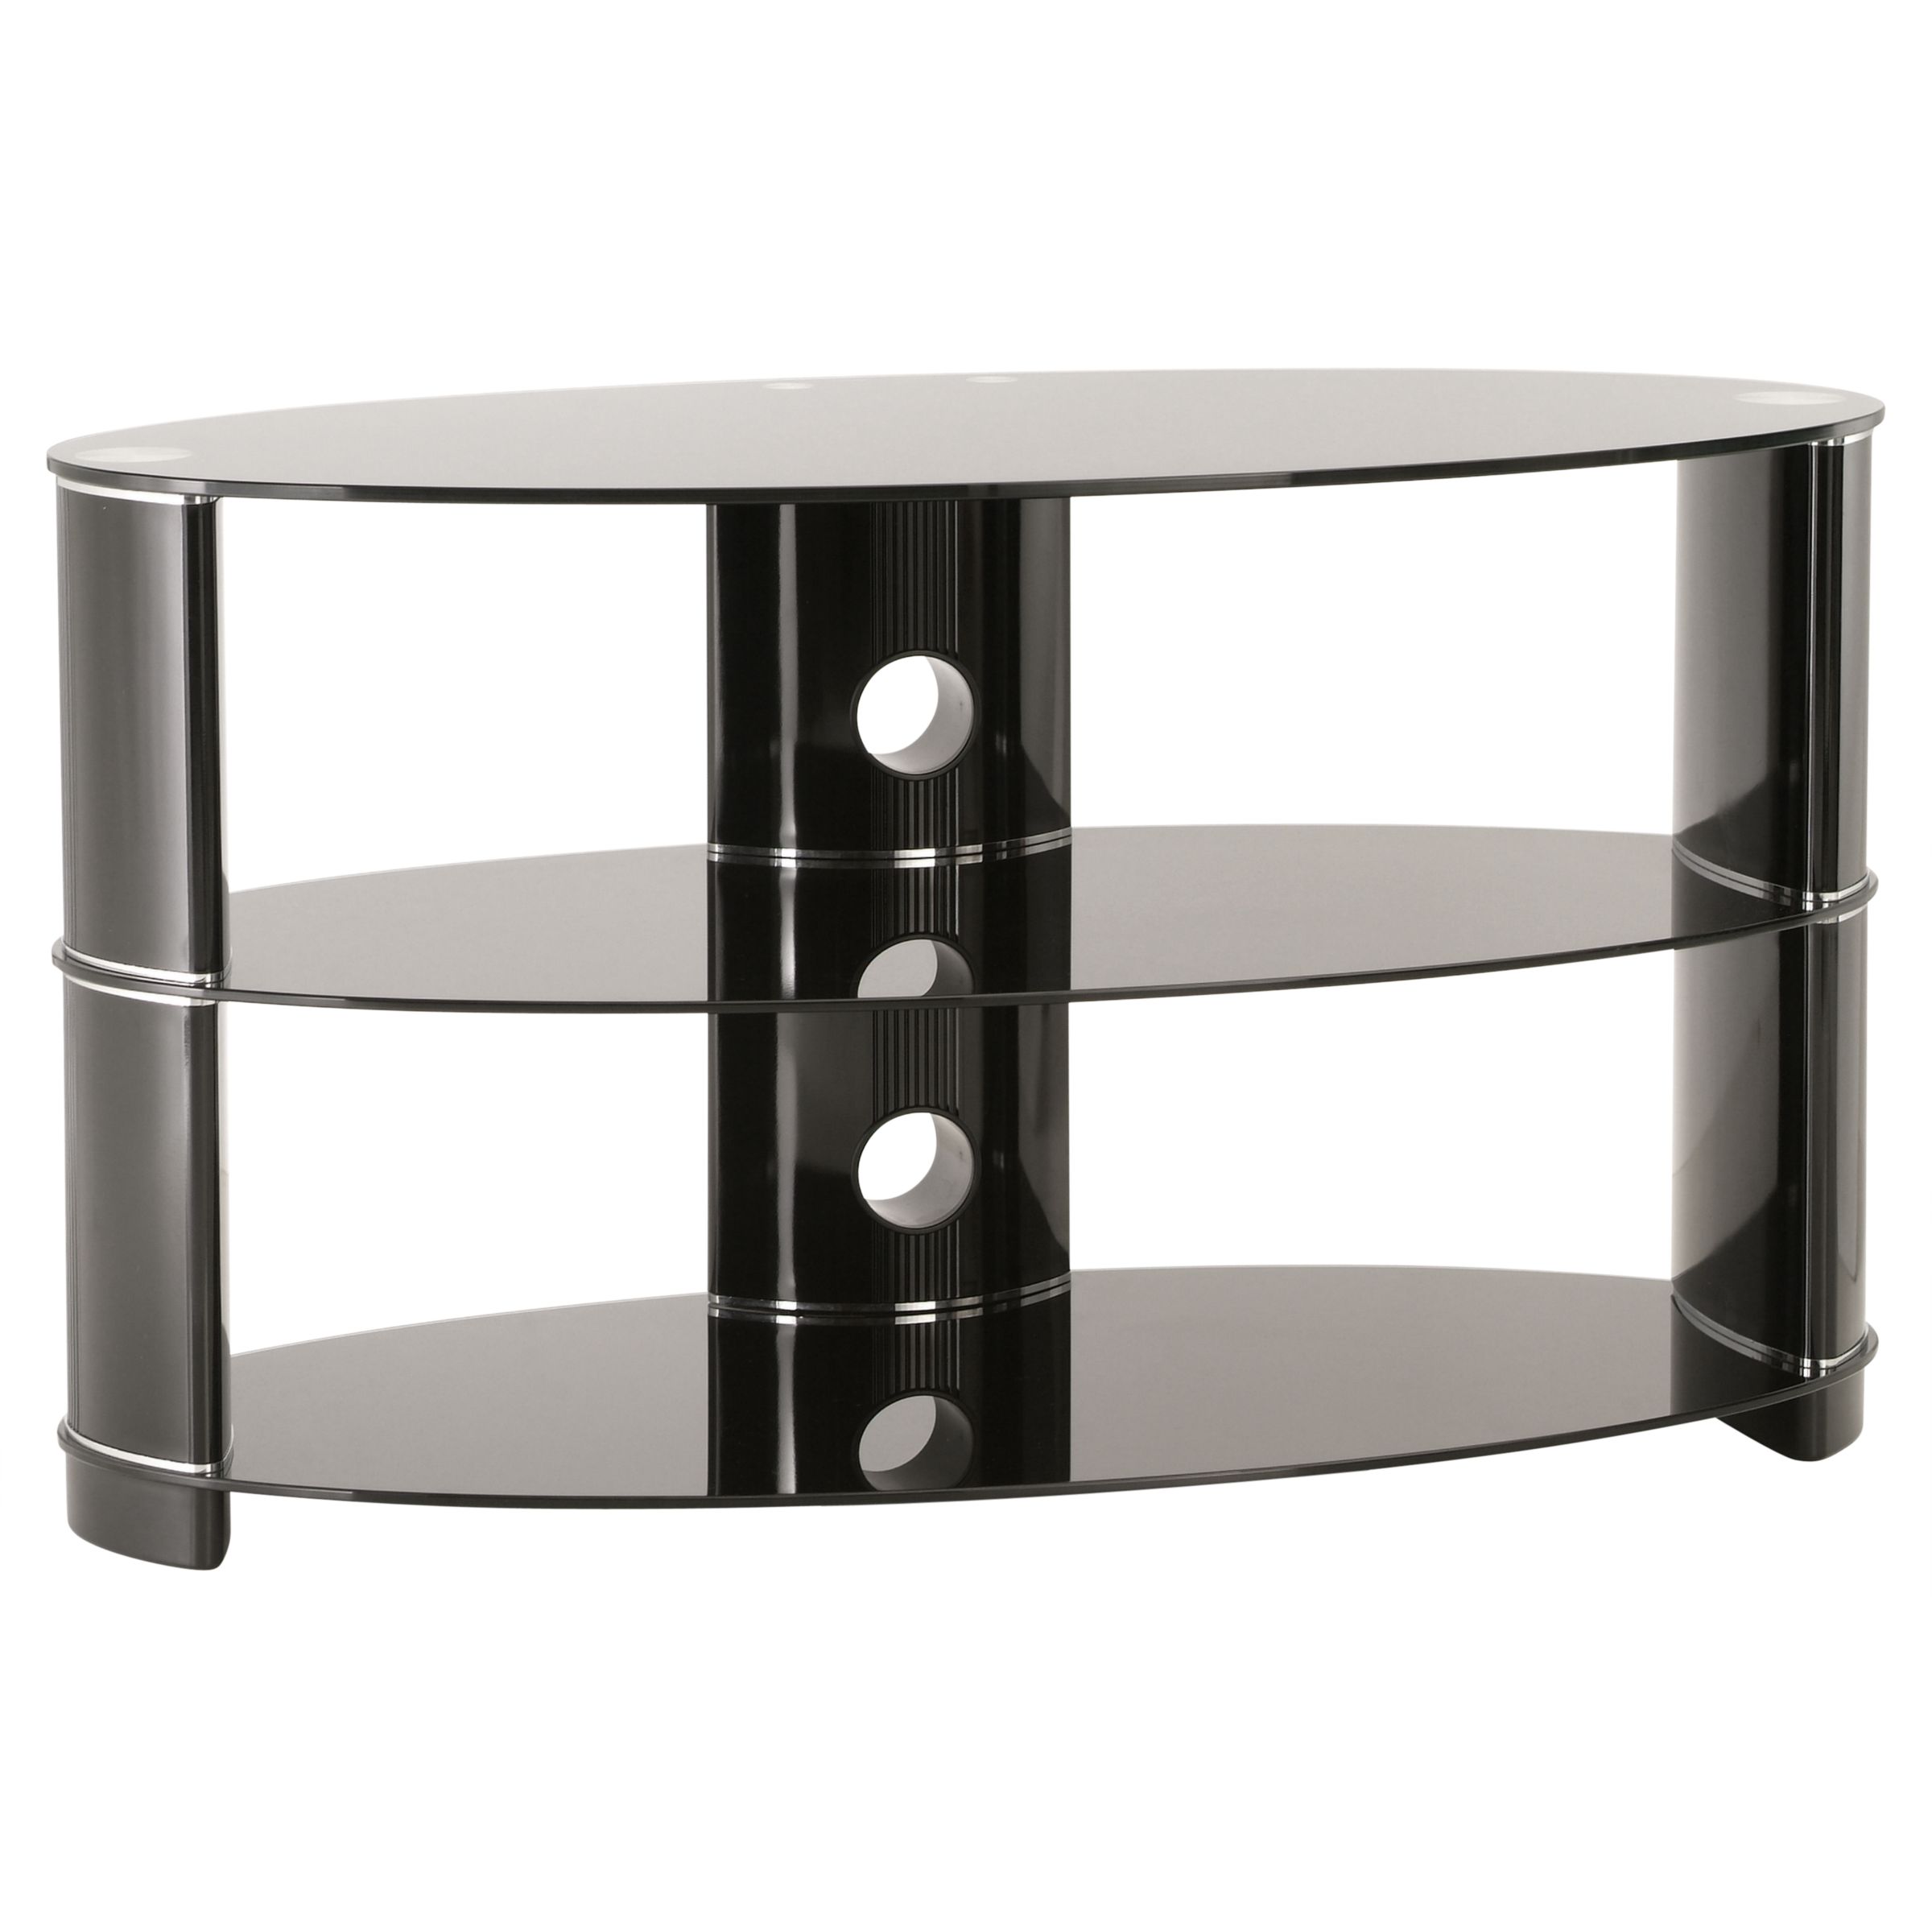 John Lewis Oval JL850/3BB Television Stand,